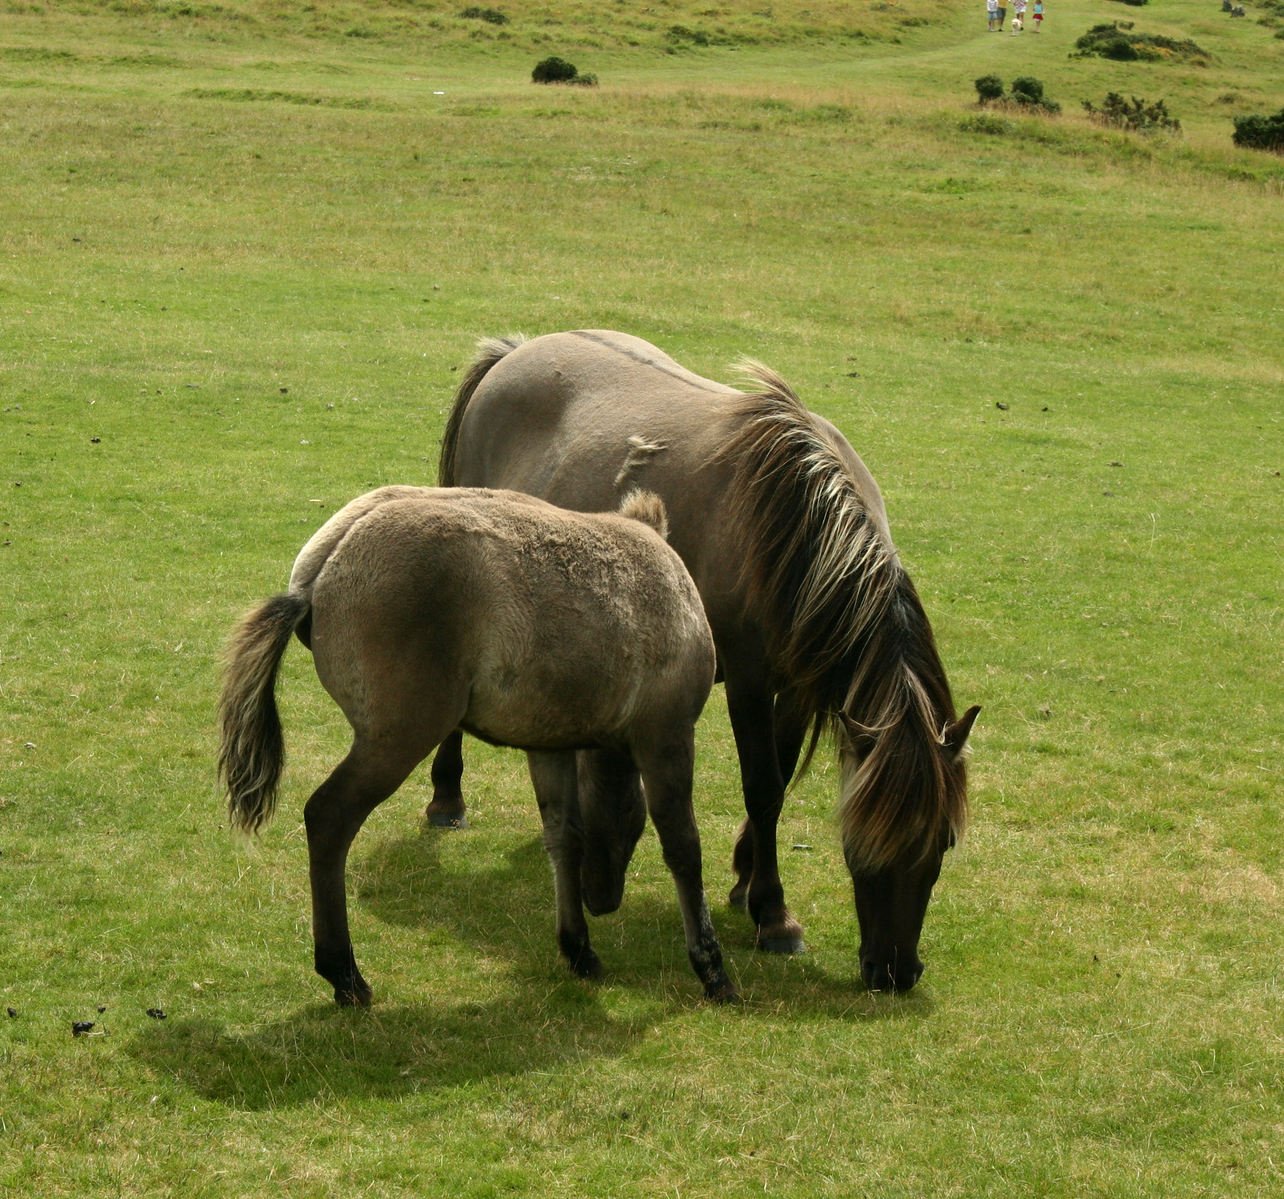 two small horses in a grassy field with one eating